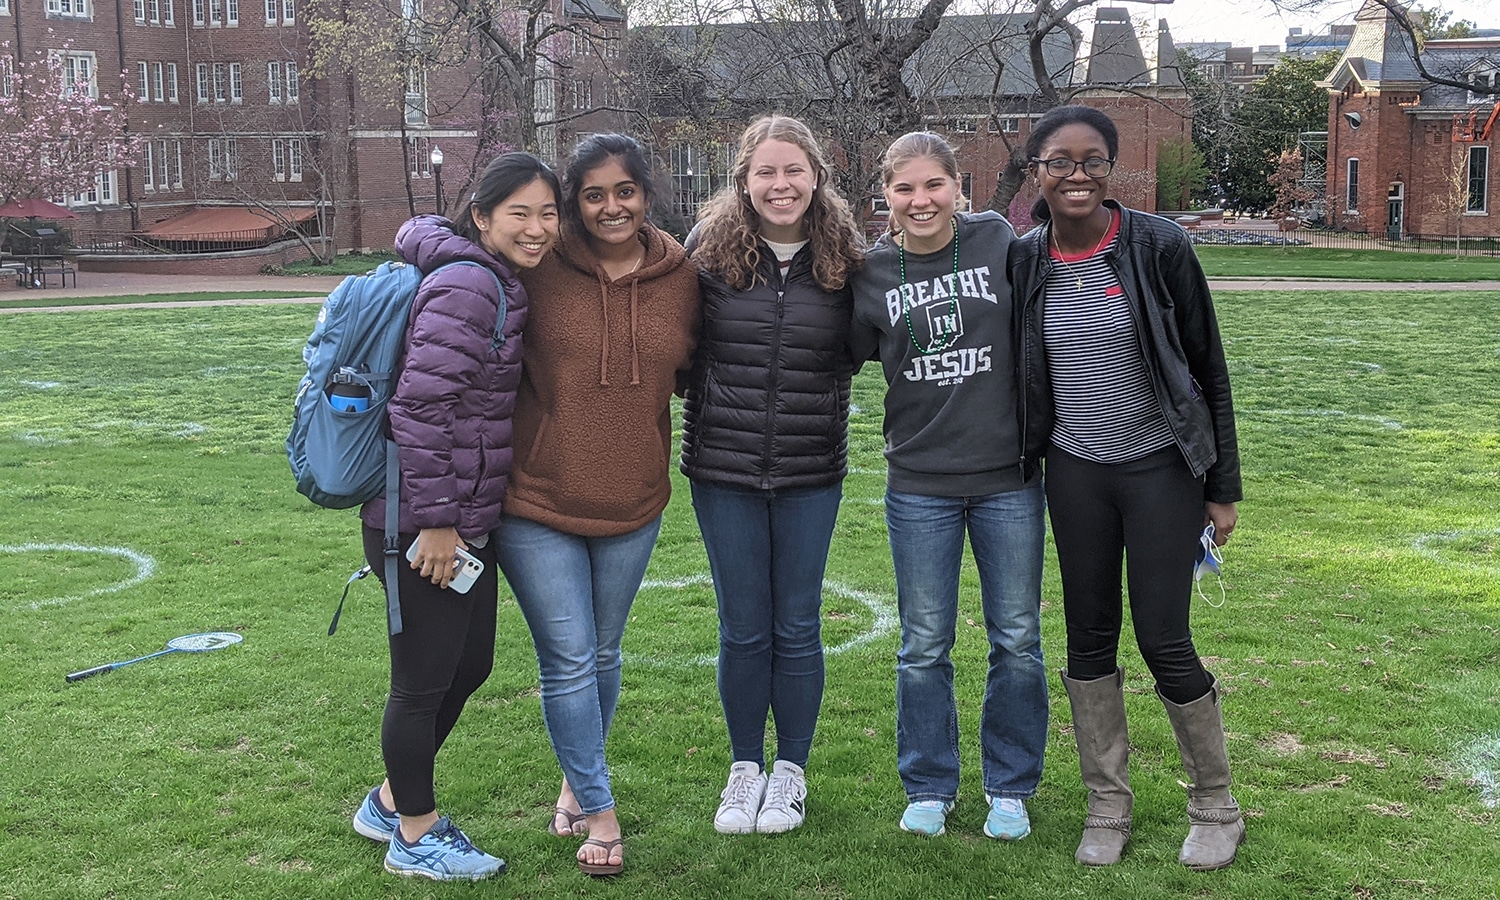 From One Student to Another: Spreading Gospel Impact | The Navigators Collegiate Ministry | Jasmine, Zara, Shelby, Mikayla & Elicia (left to right) are spreading the gospel and making disciples at Vanderbilt.